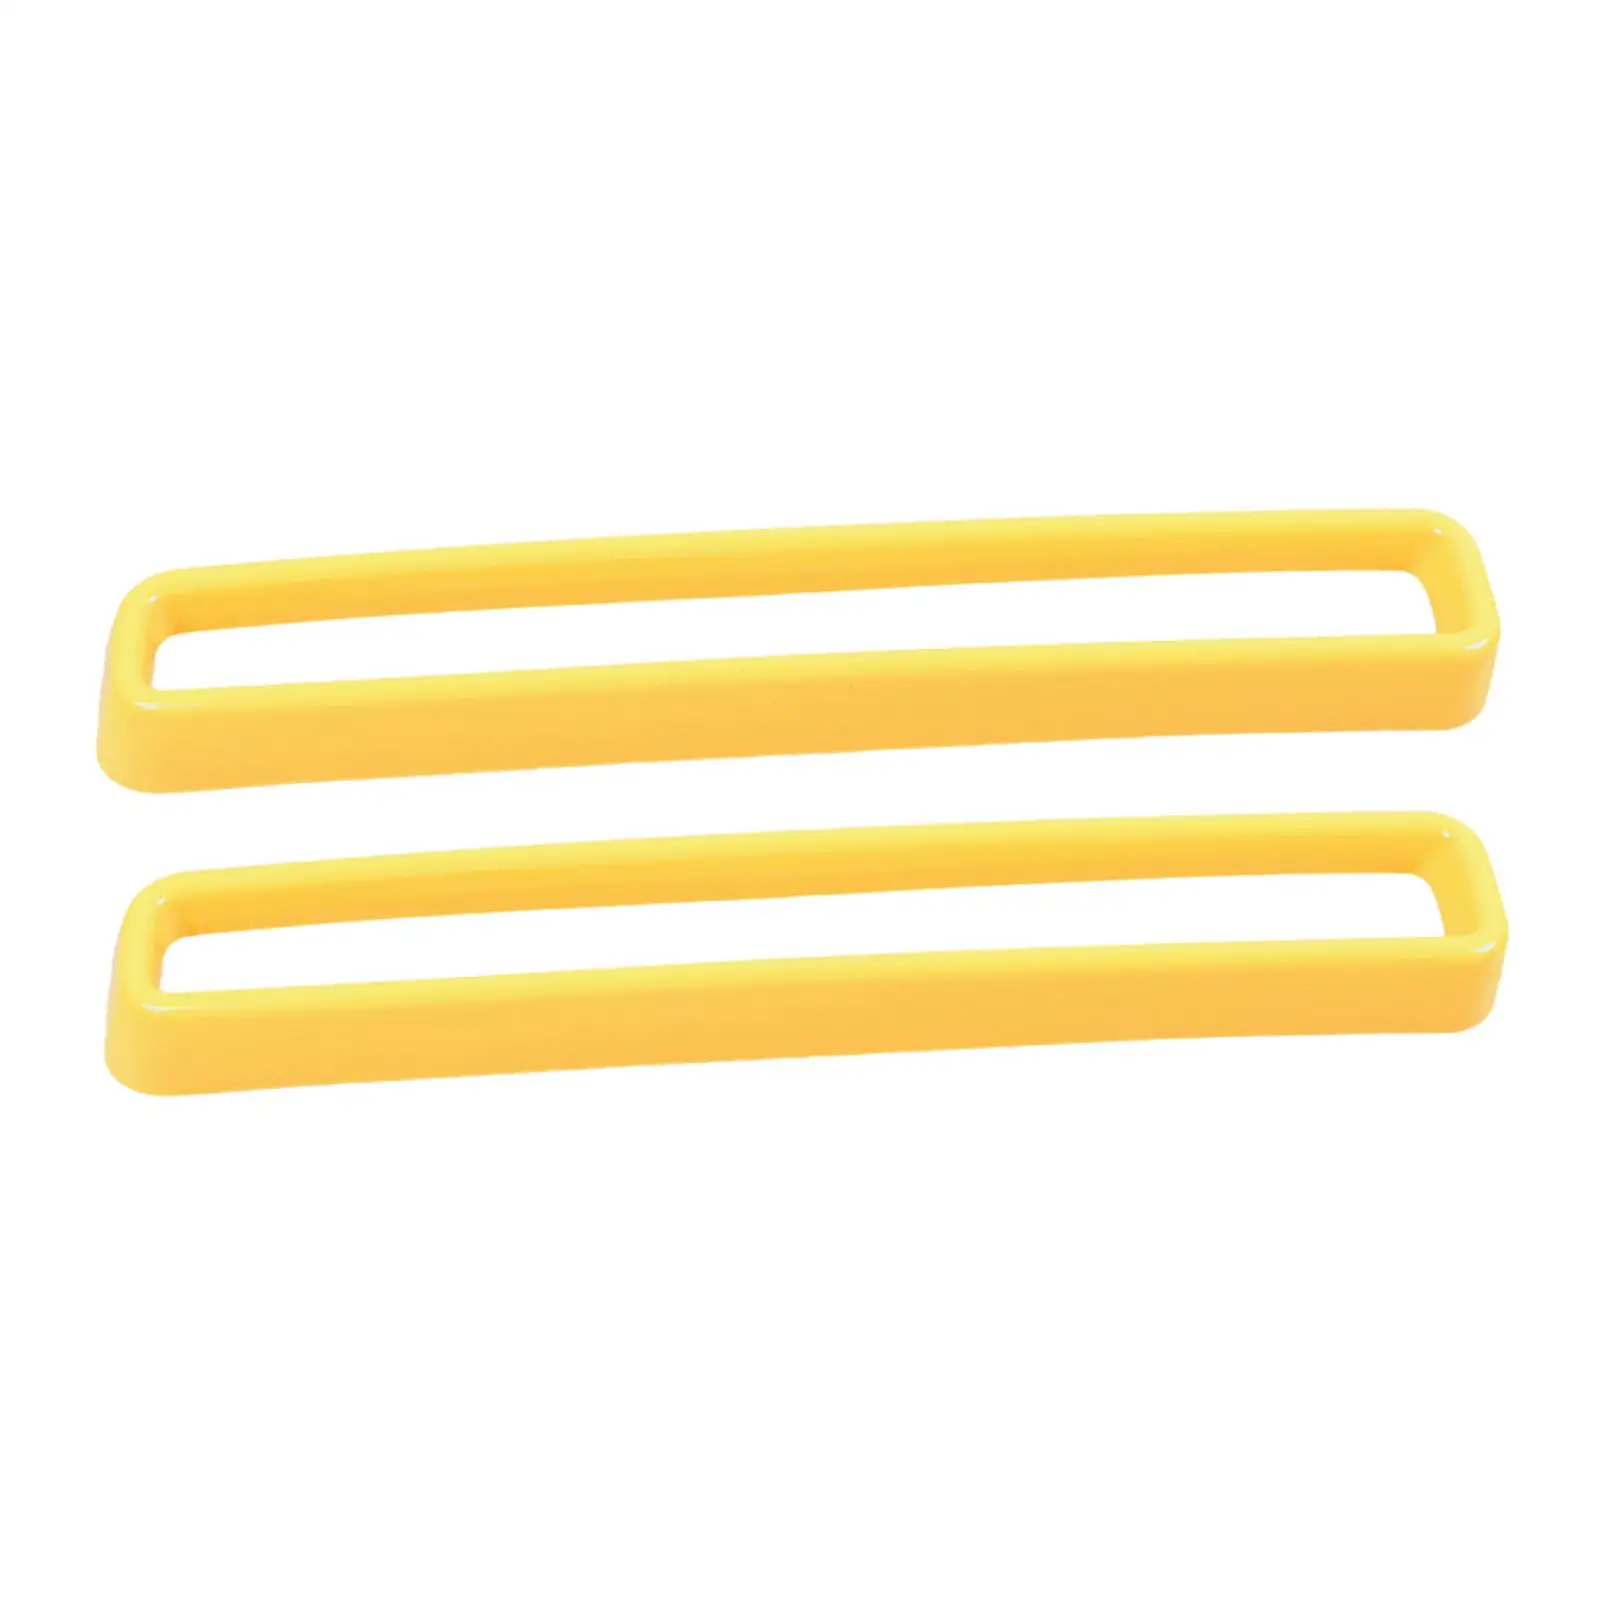 2015-20201Set Front Grill Grille Inserts cover decoration Spare Parts  ,  your car from scrape and abrasion.